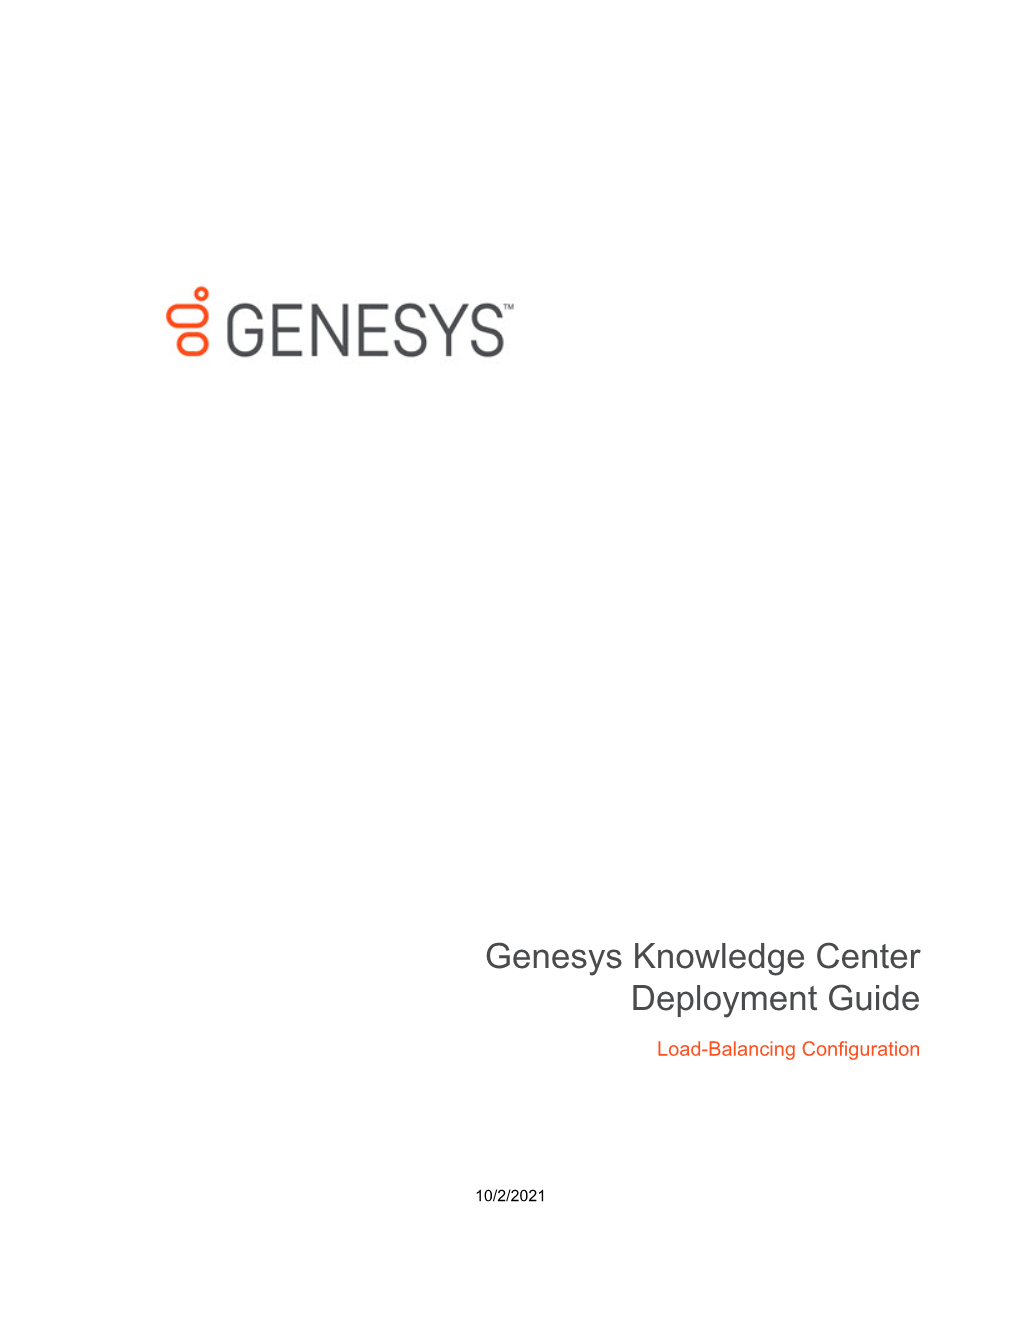 Genesys Knowledge Center Deployment Guide